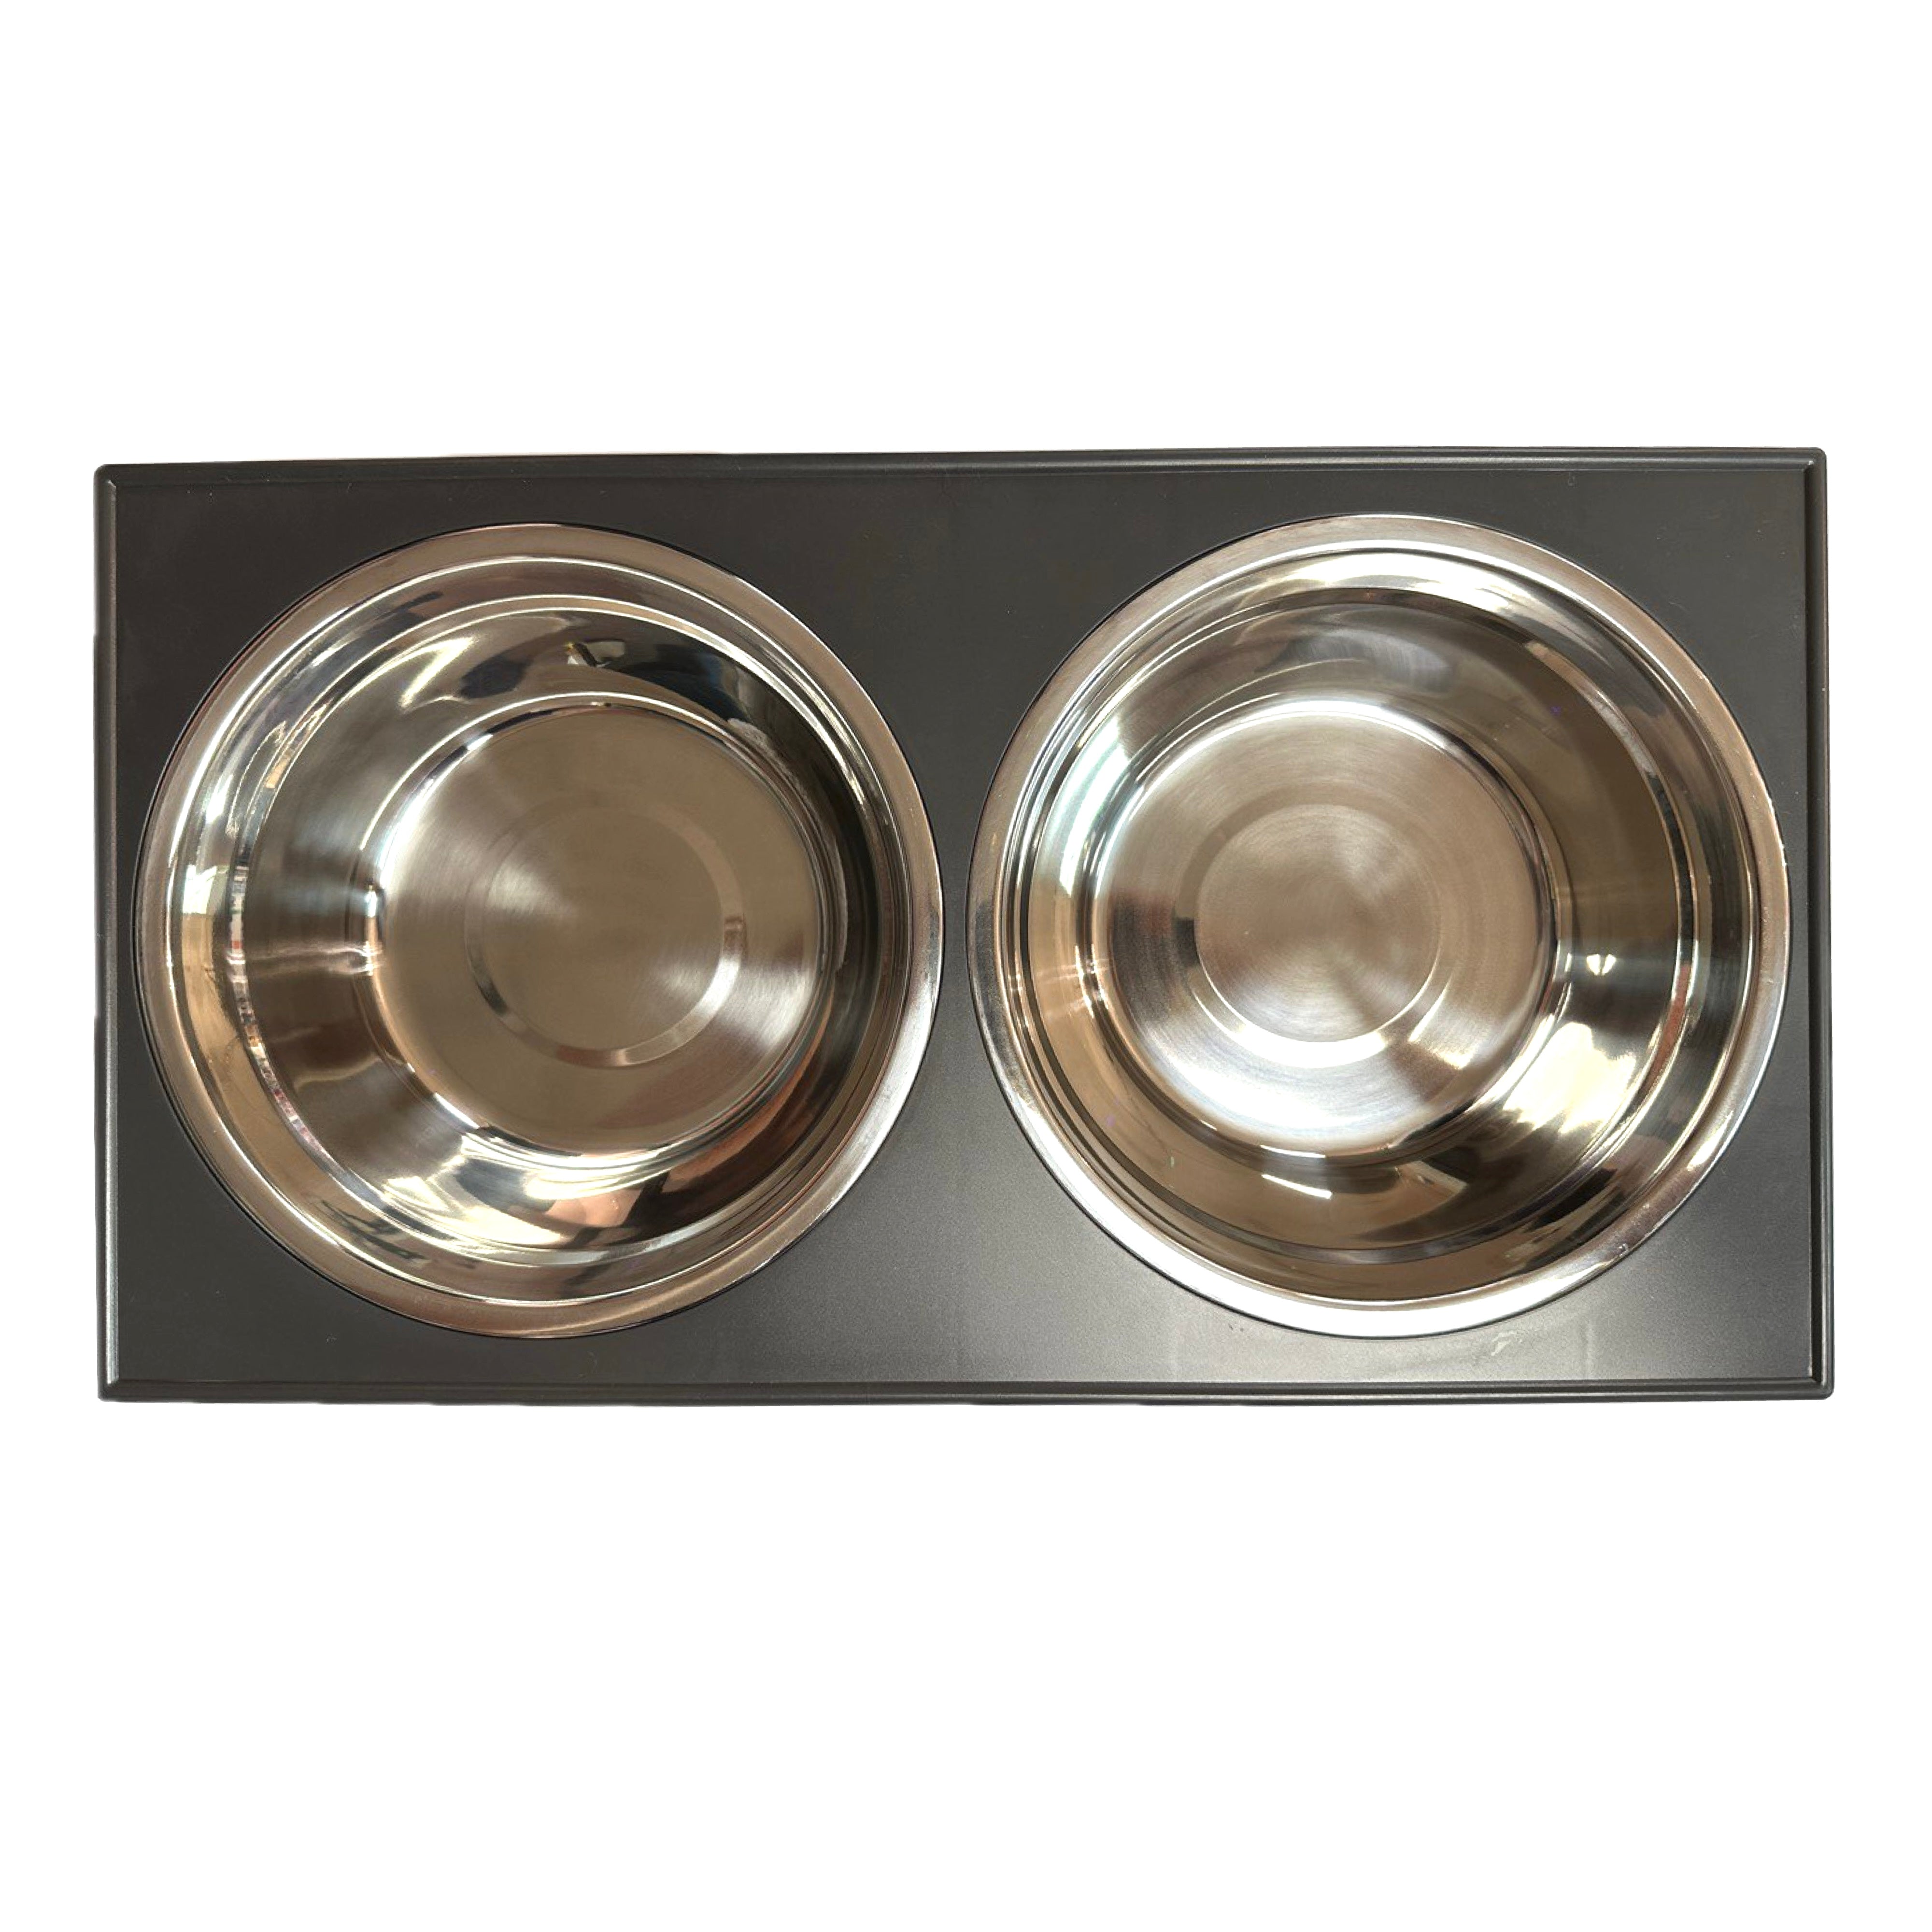 Elevated Feeder with Stainless Steel Bowls Easily Adjusts from a Height of 8" to 12"